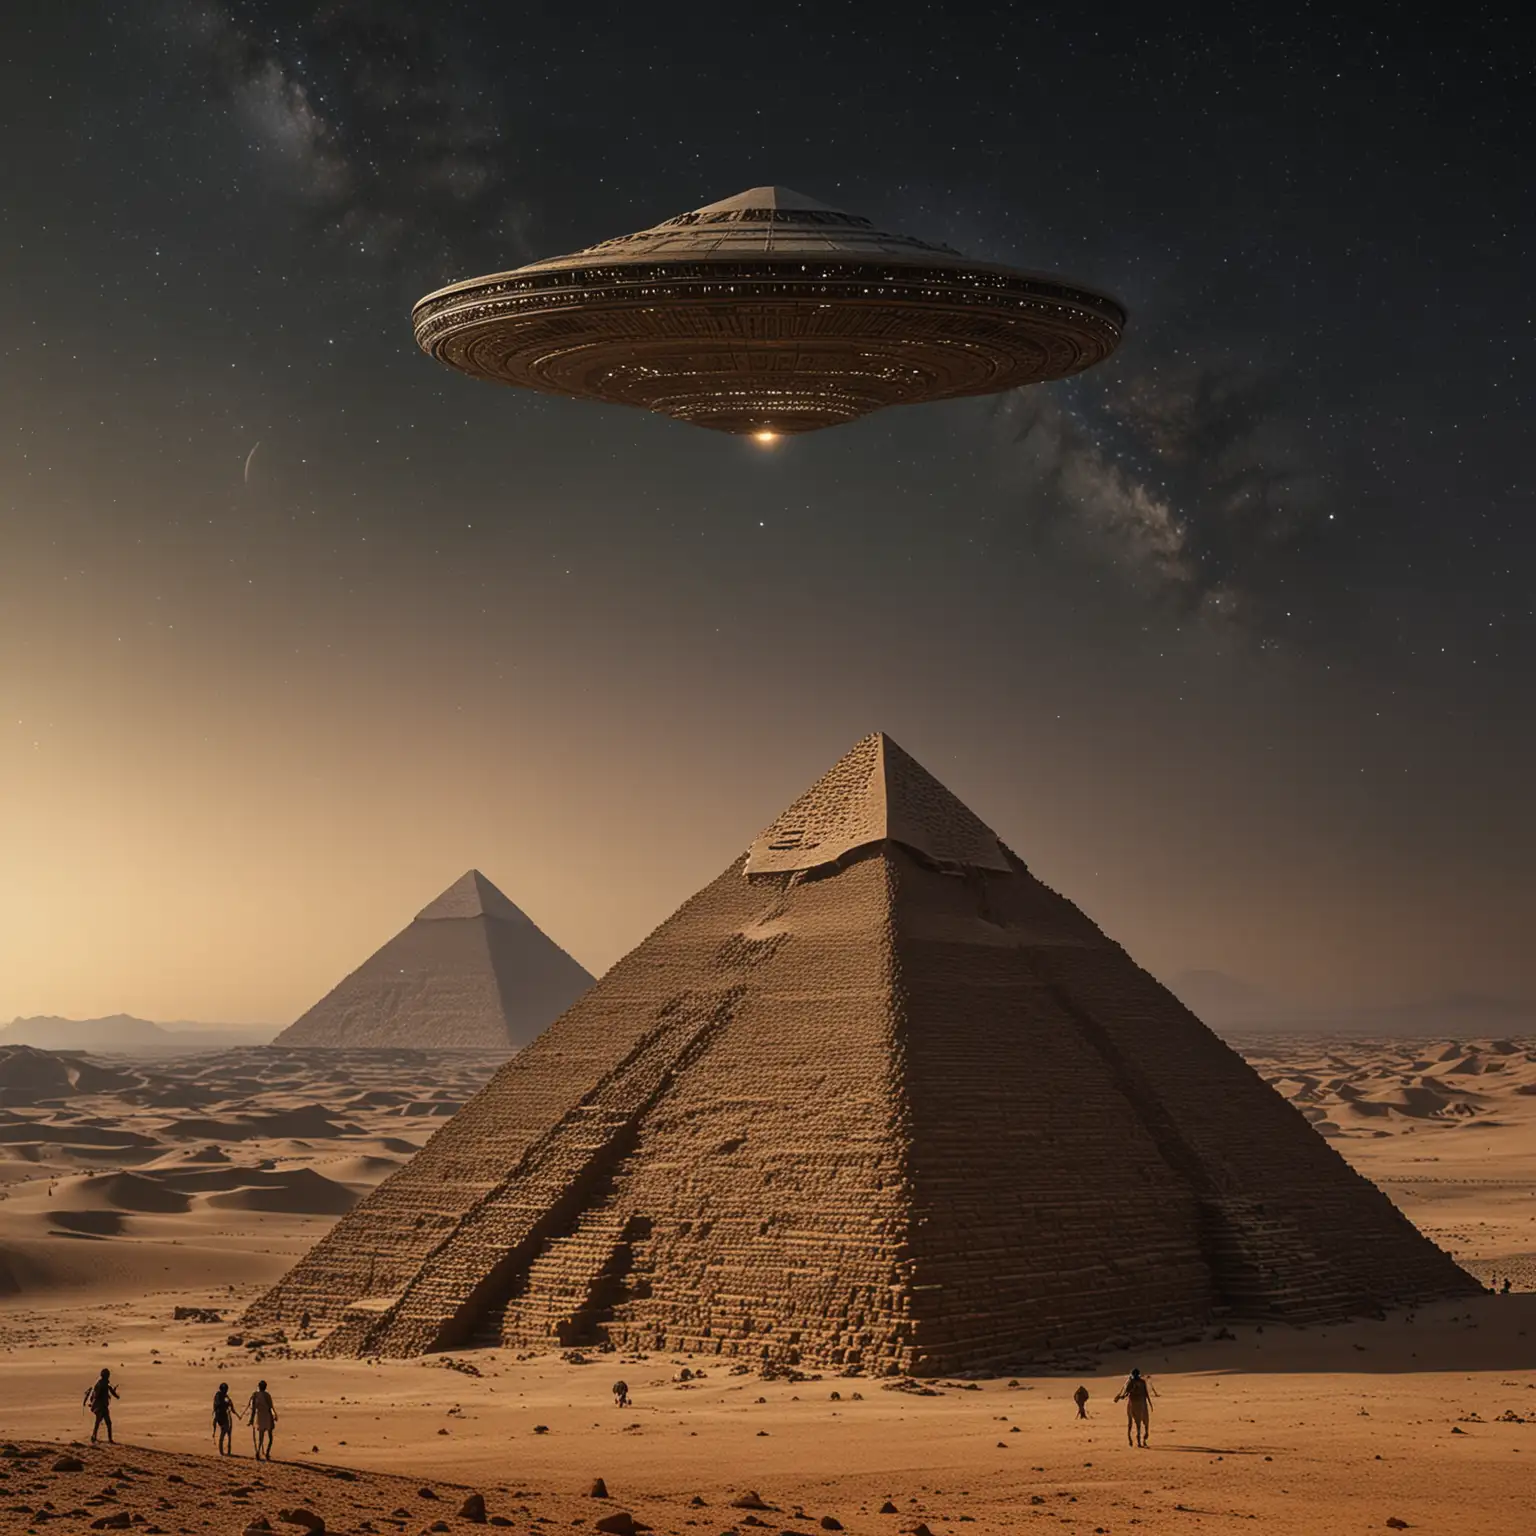 AlienAssisted Pyramid Construction under UFO Surveillance in Ethereal AwardWinning Photography